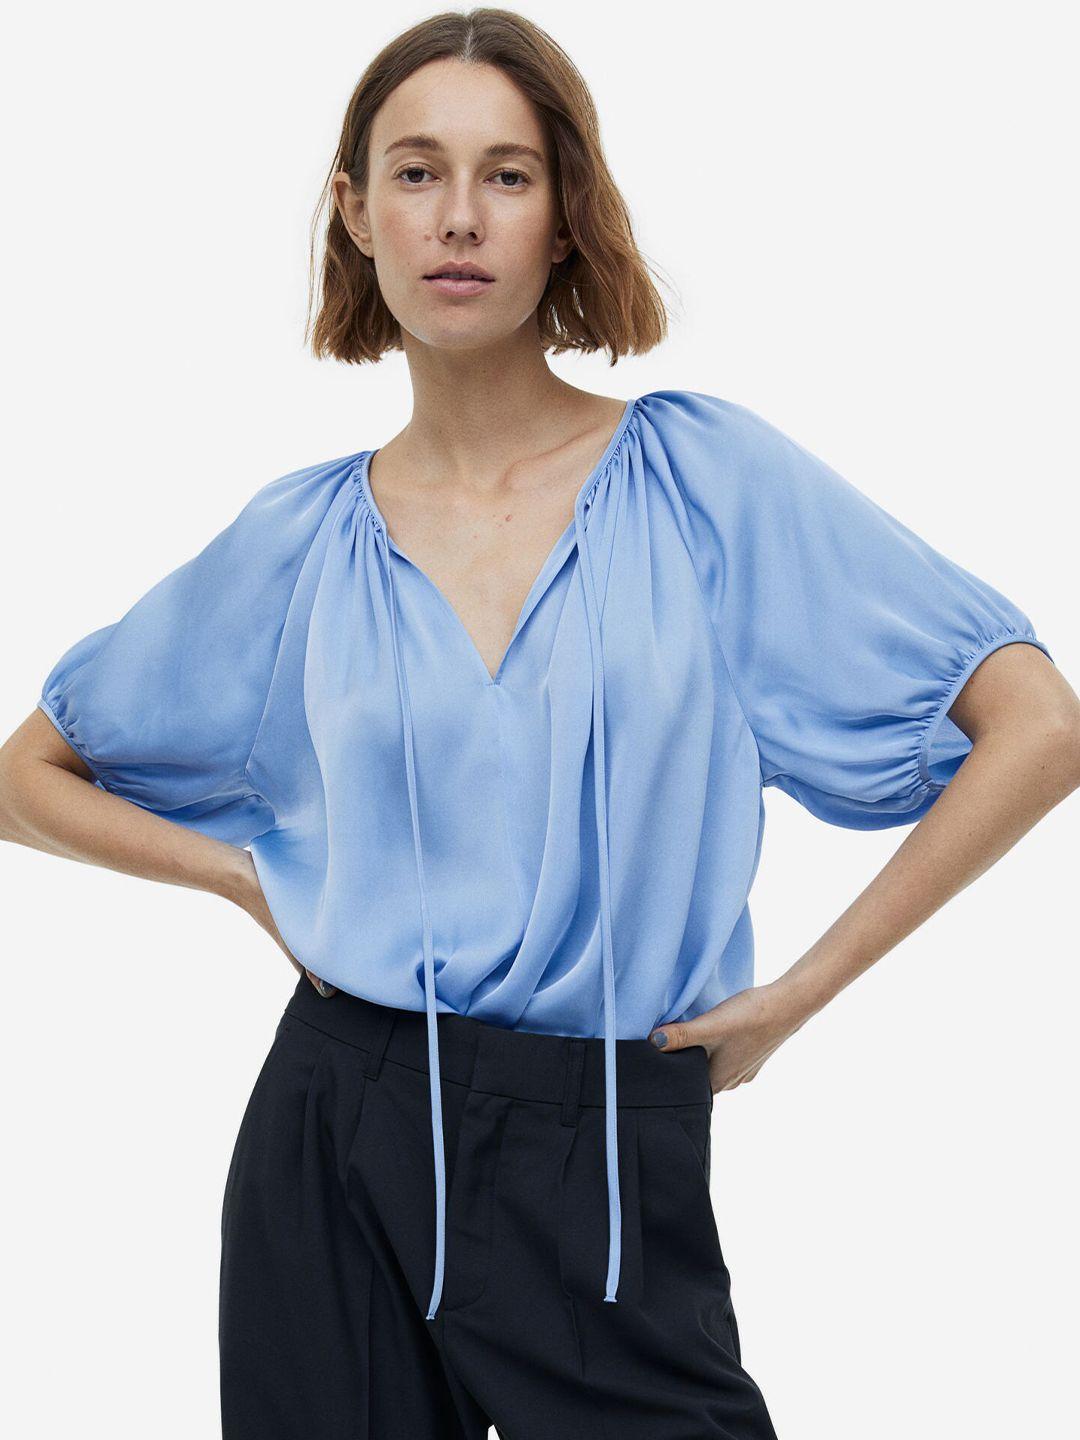 h&m oversized tie-top blouse